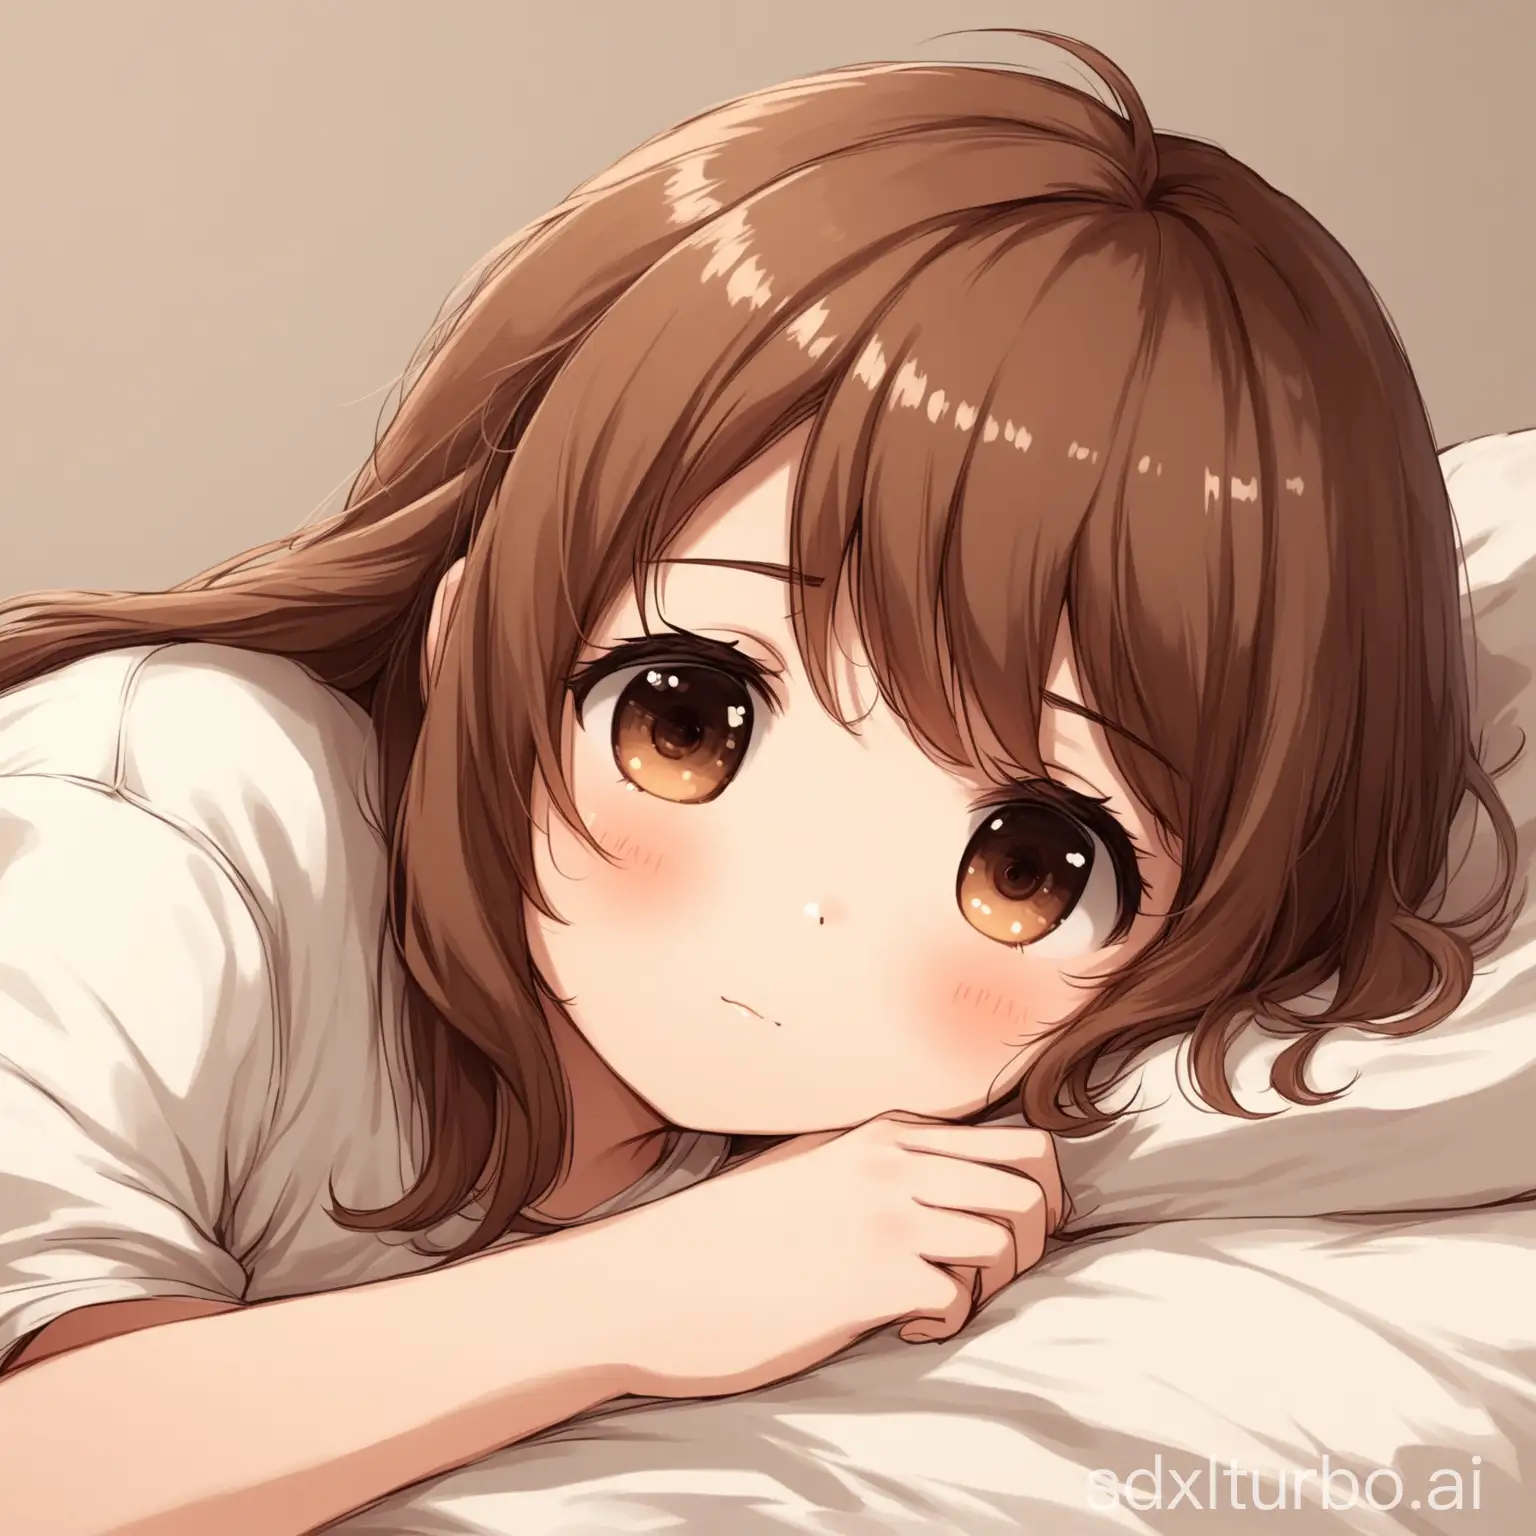 Adorable-BrownHaired-Girl-Relaxing-Serenely